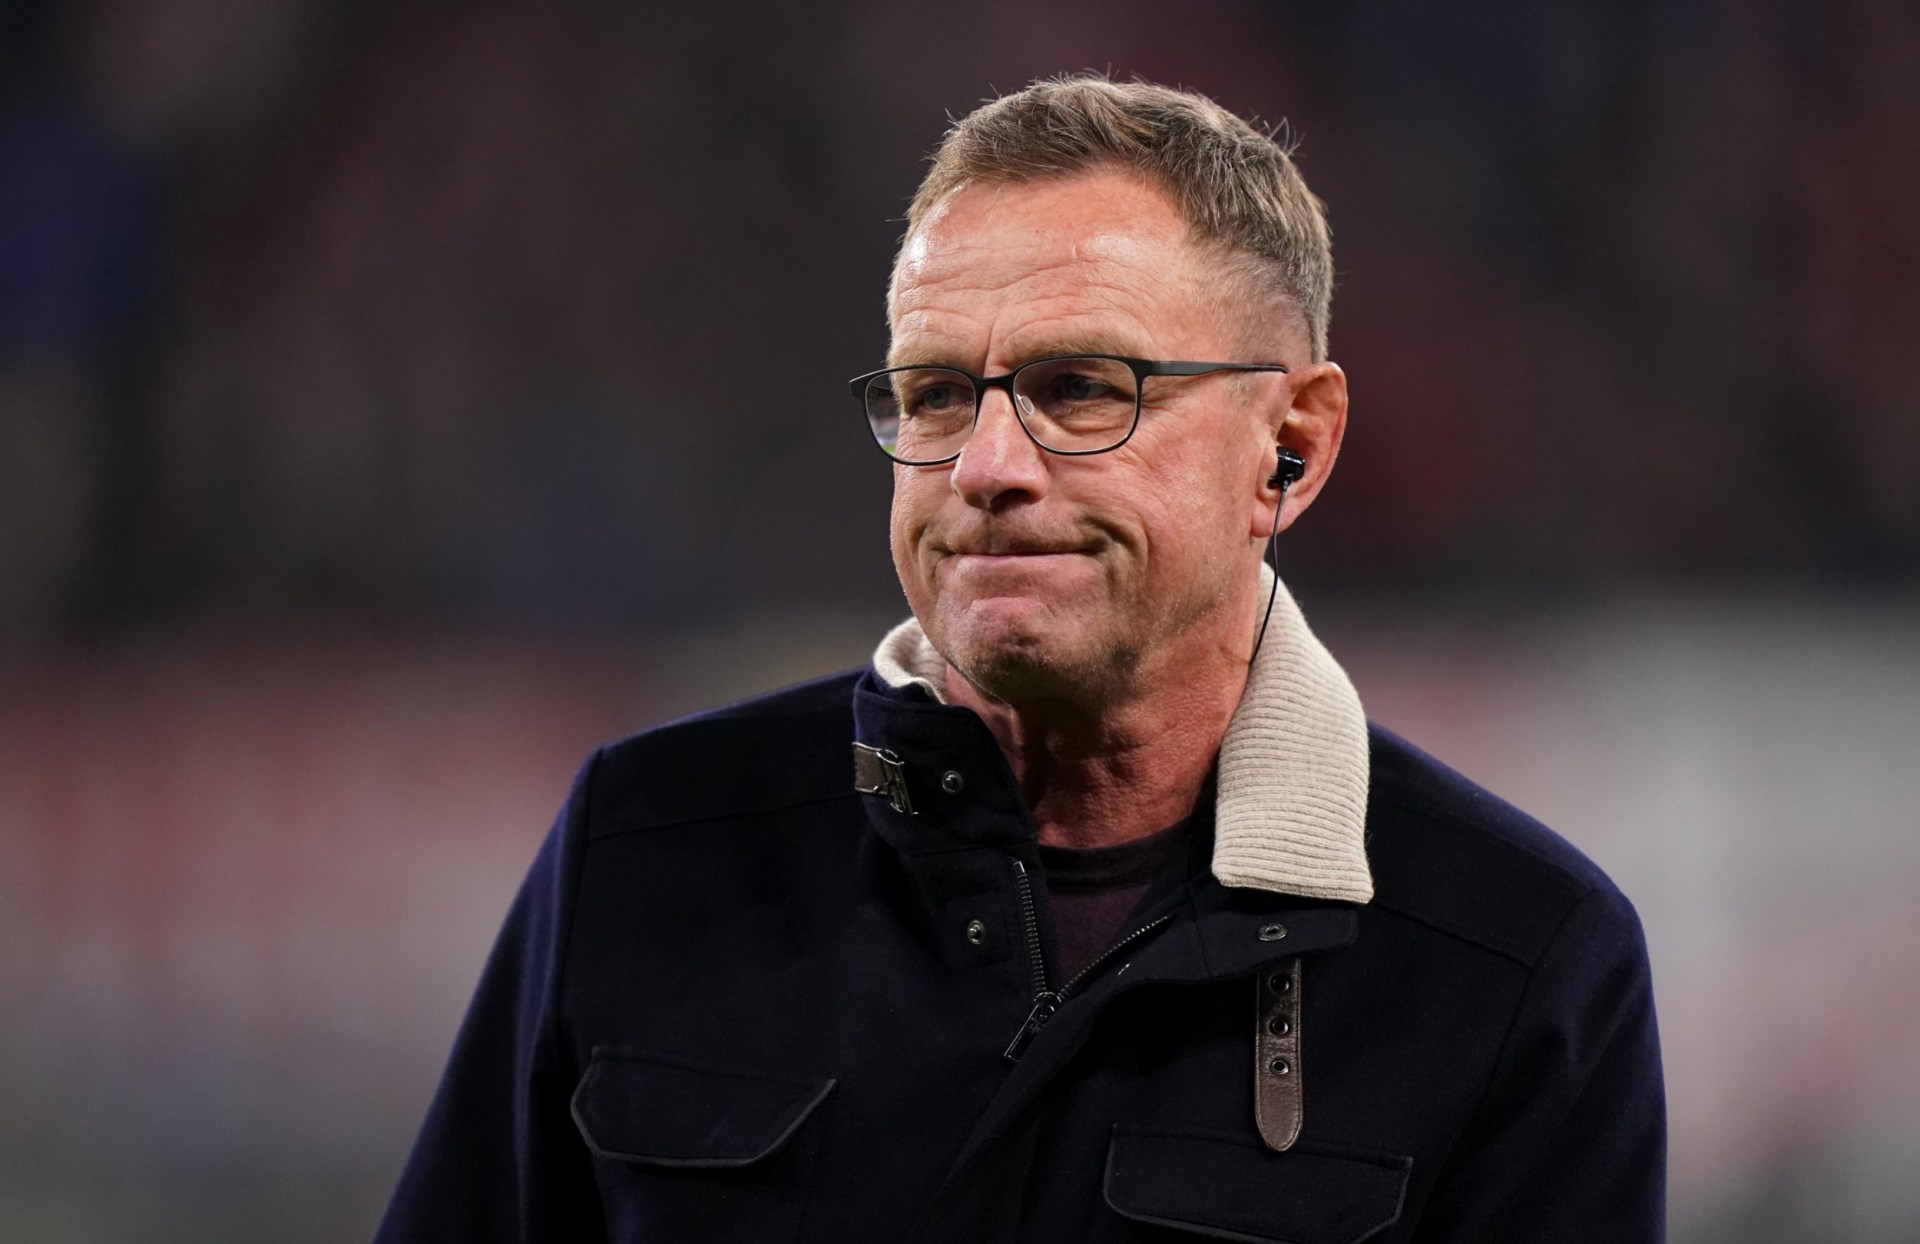 thomas tuchel responds to bayern munich approach for ralf rangnick as fans set up petition